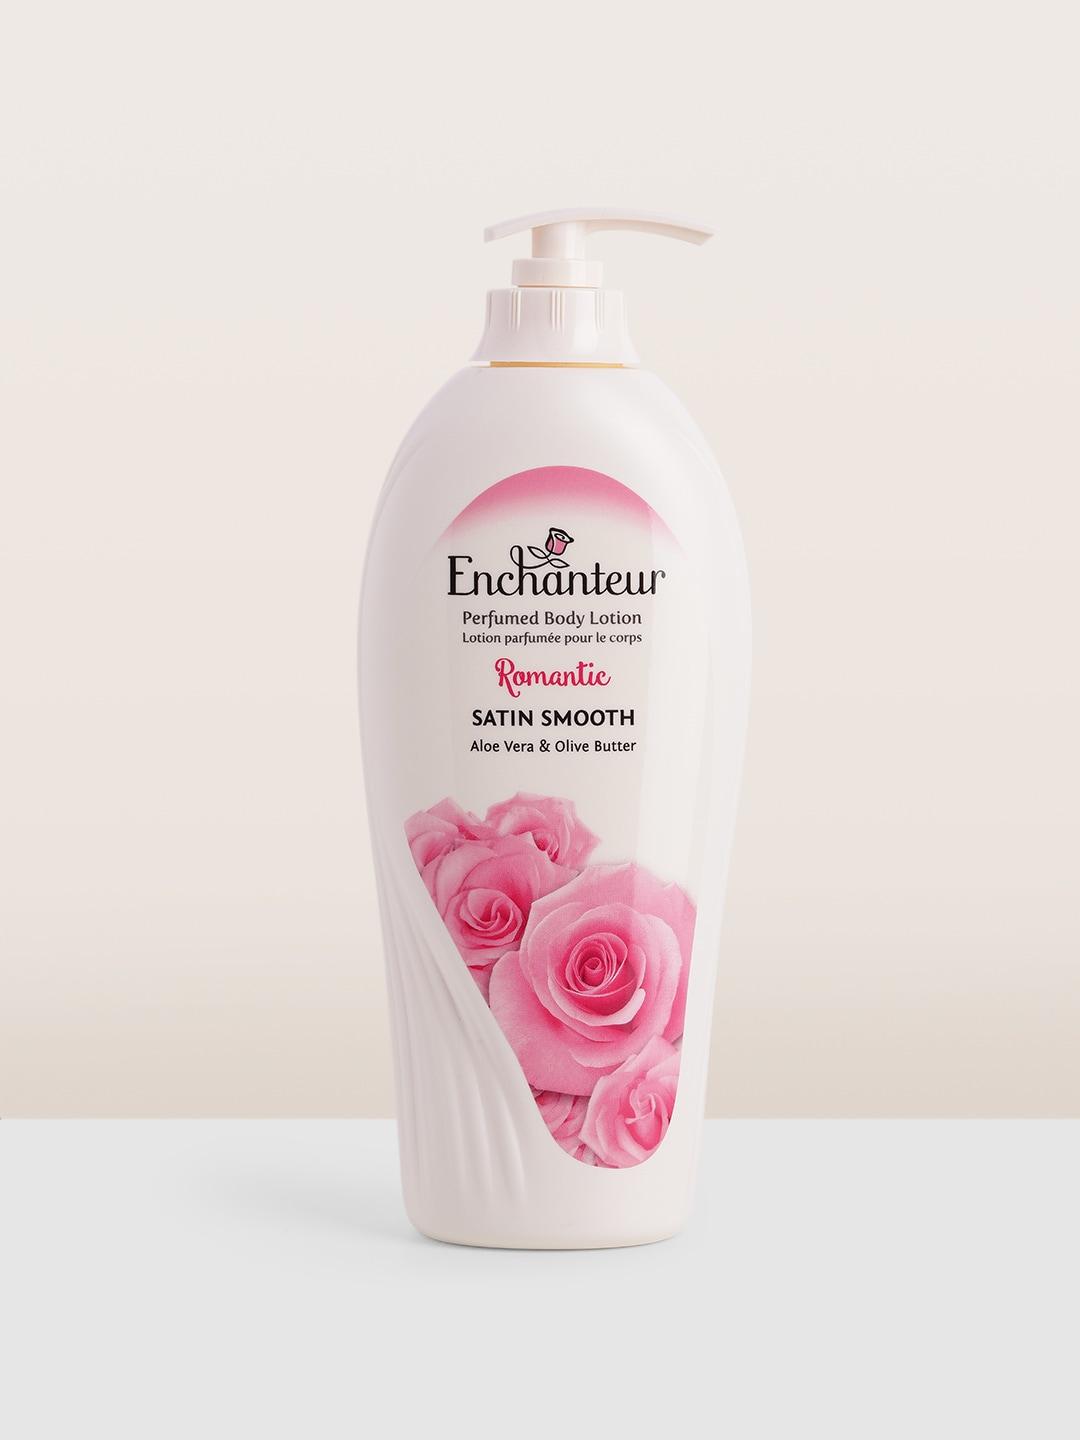 Enchanteur Romantic Satin Smooth Perfumed Body Lotion with Aloevera & Olive Butter - 500ml